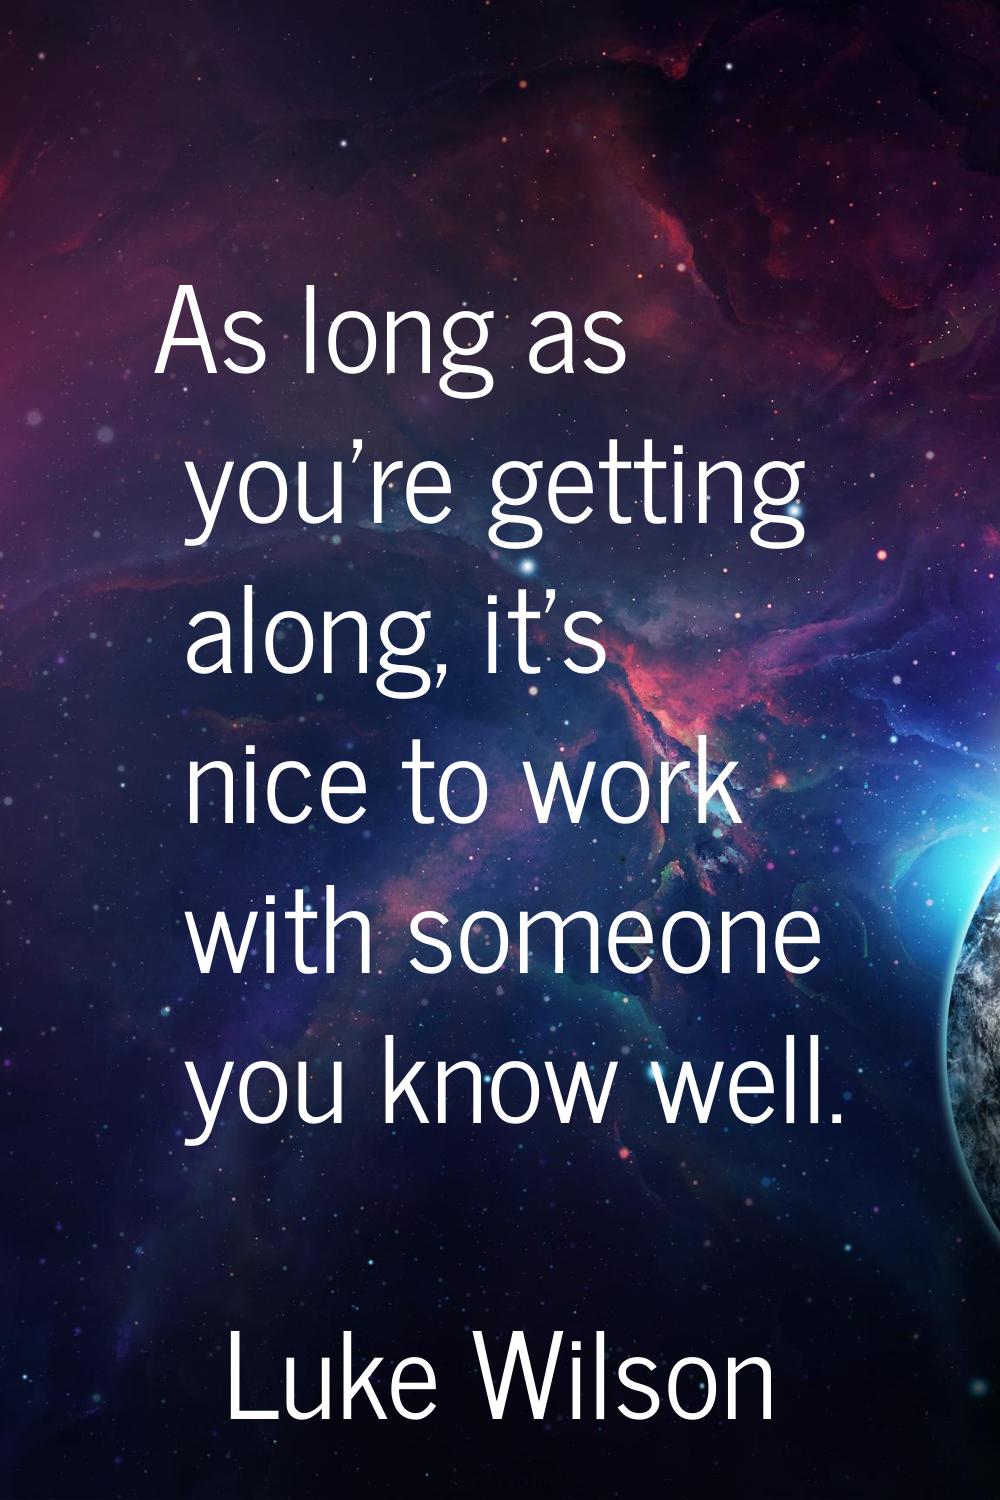 As long as you're getting along, it's nice to work with someone you know well.